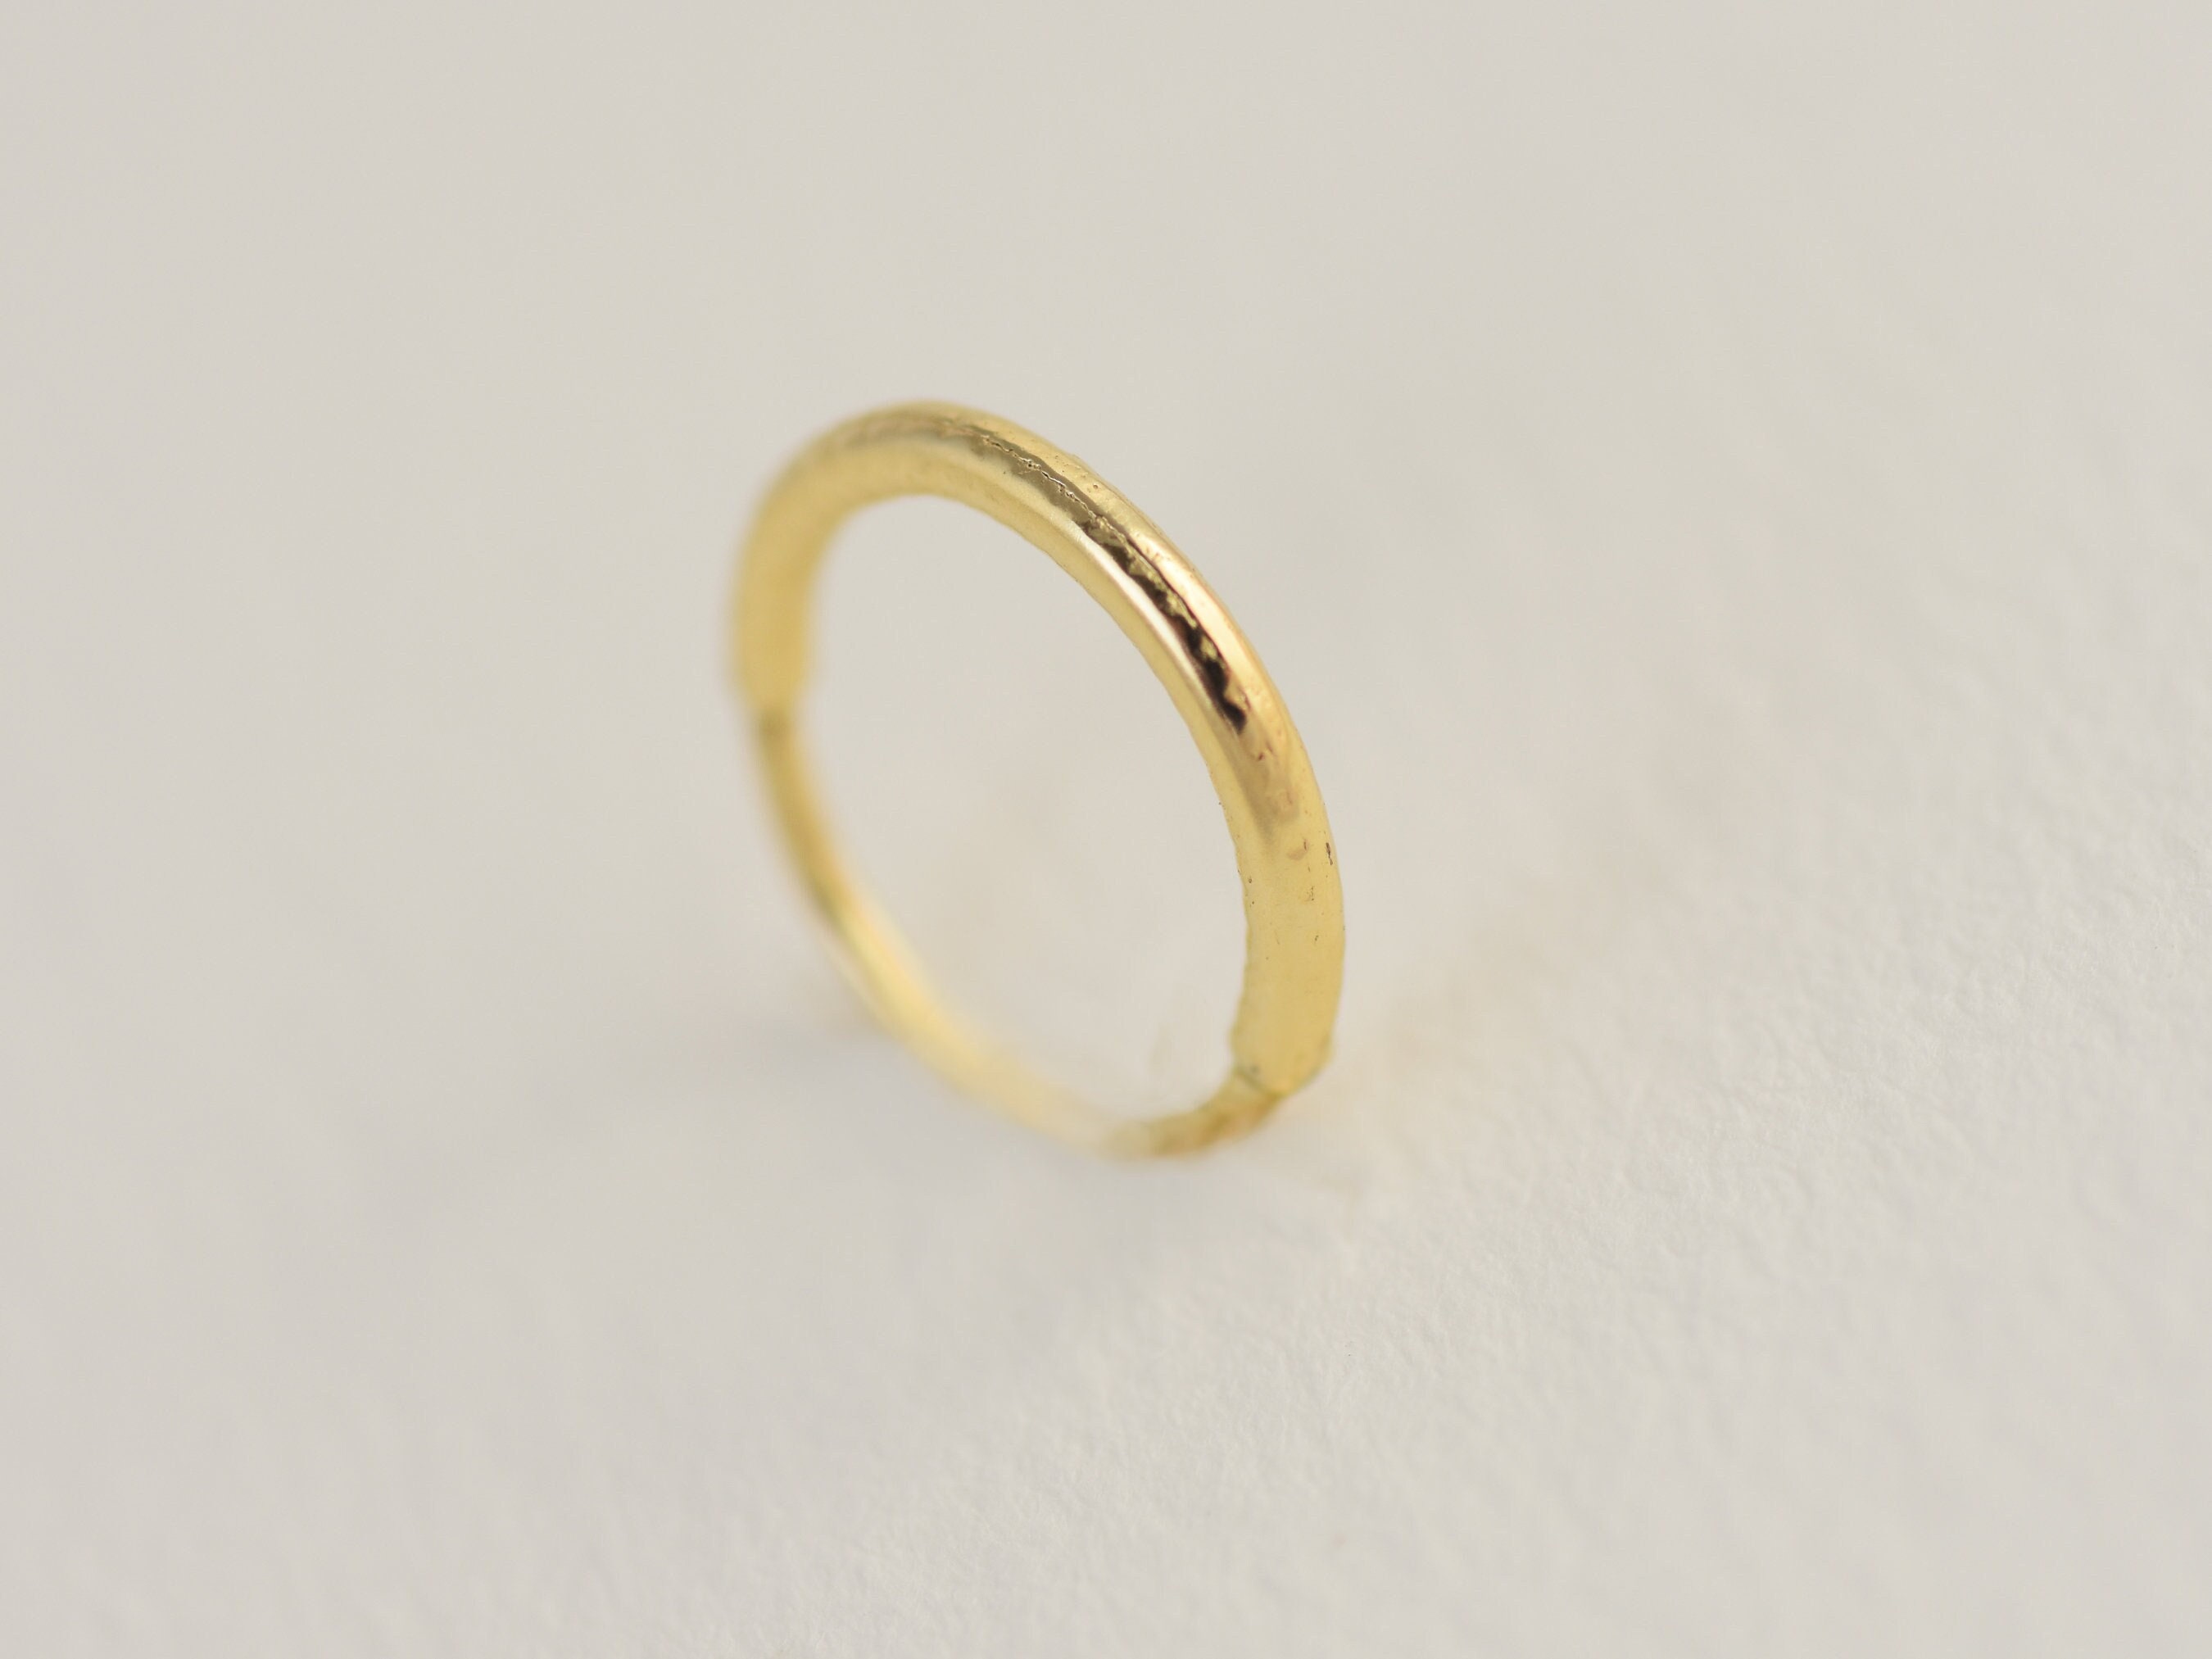 10kt Solid Yellow Gold Nose Ring In A Plain Ball Design - Walmart.com